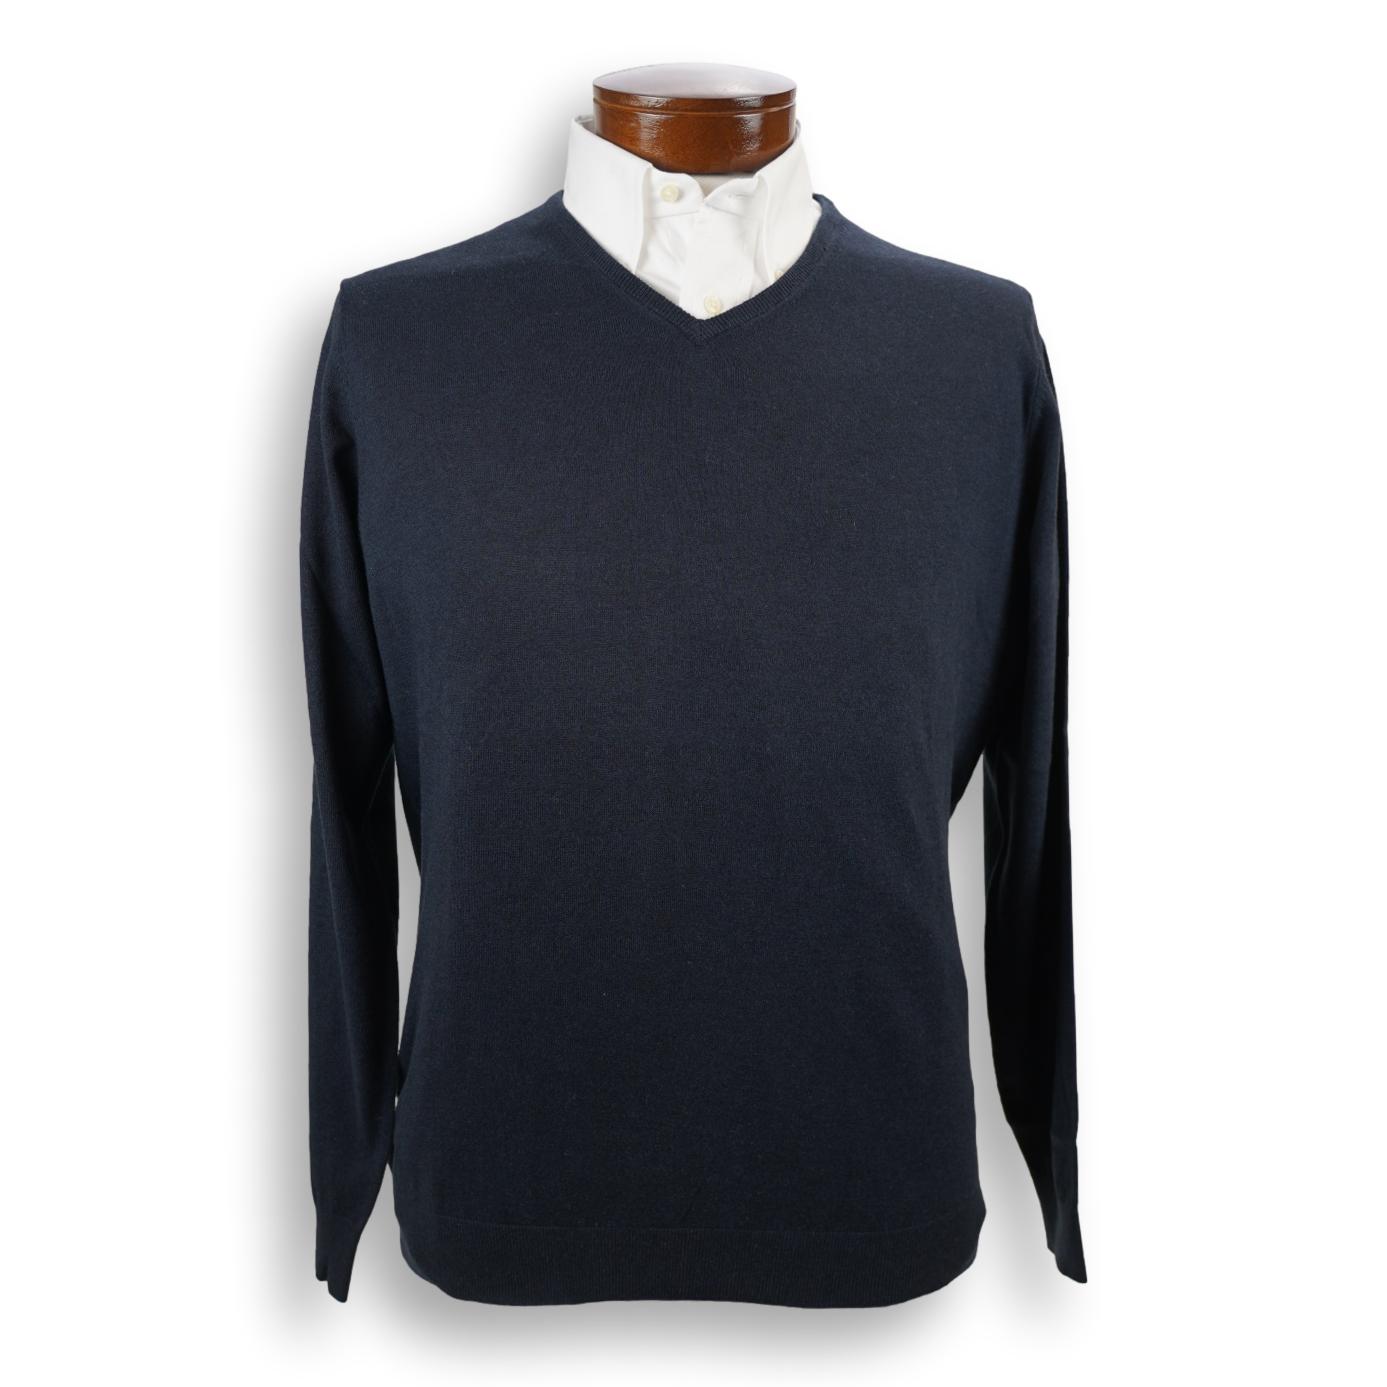 Cotton, Silk, and Cashmere Blend V-Neck Sweater